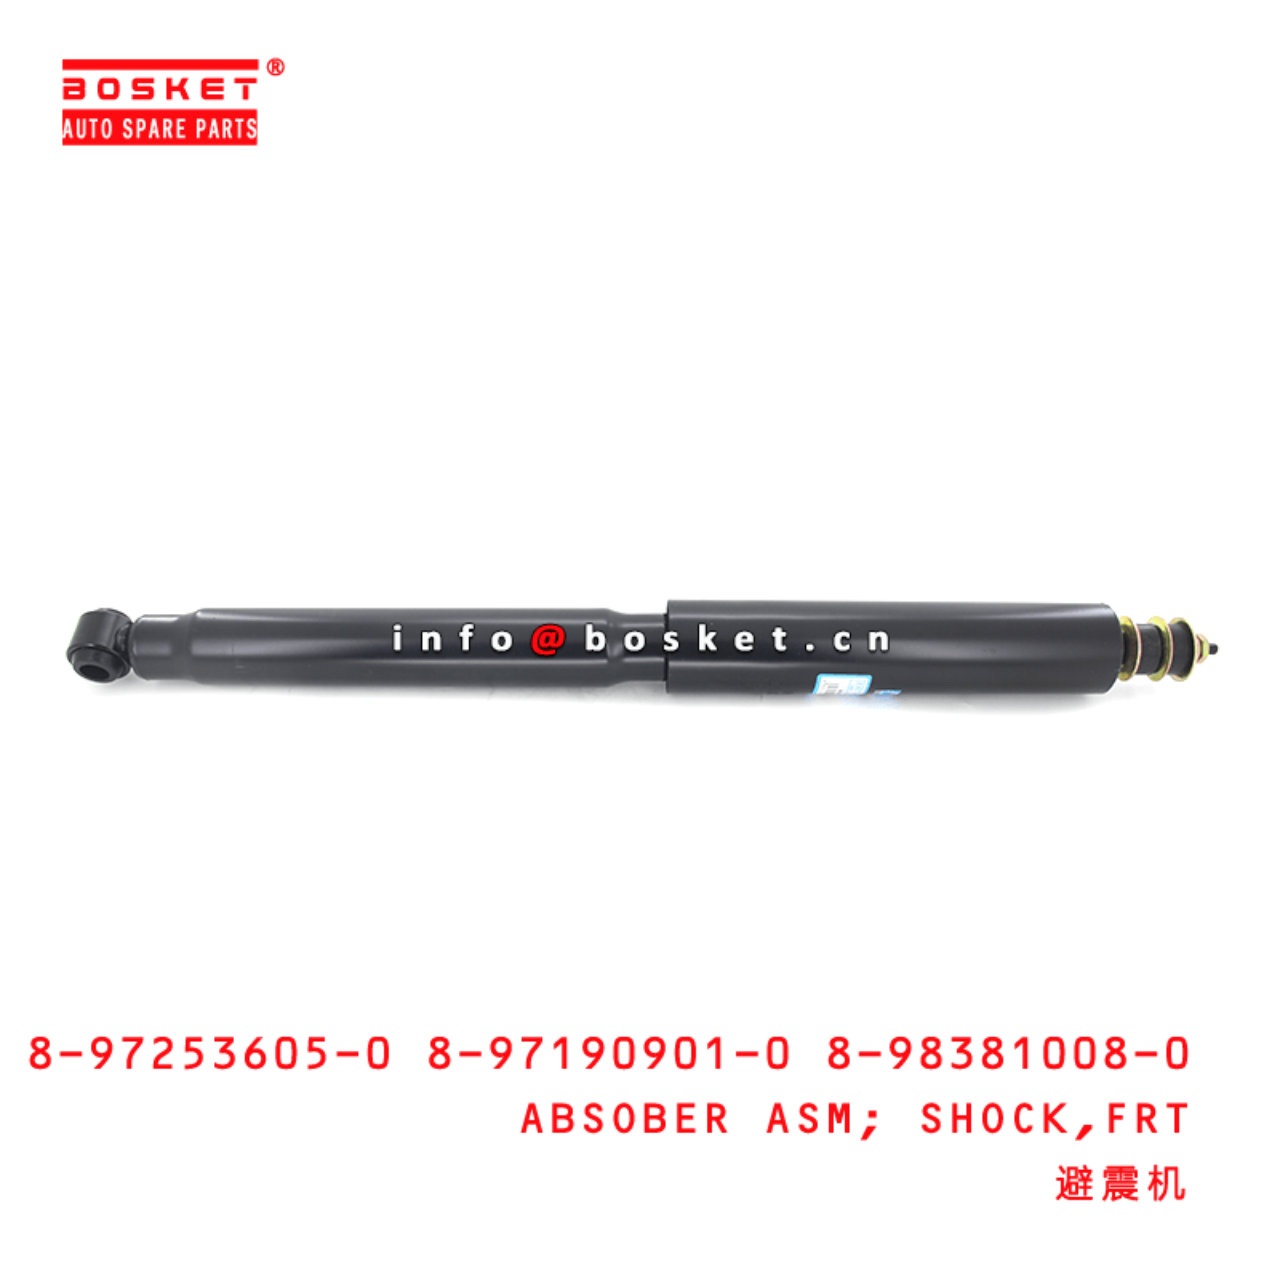 8-97253605-0 8-97190901-0 8-98381008-0 Front Shock Absober Assembly Suitable for ISUZU 600P 100P